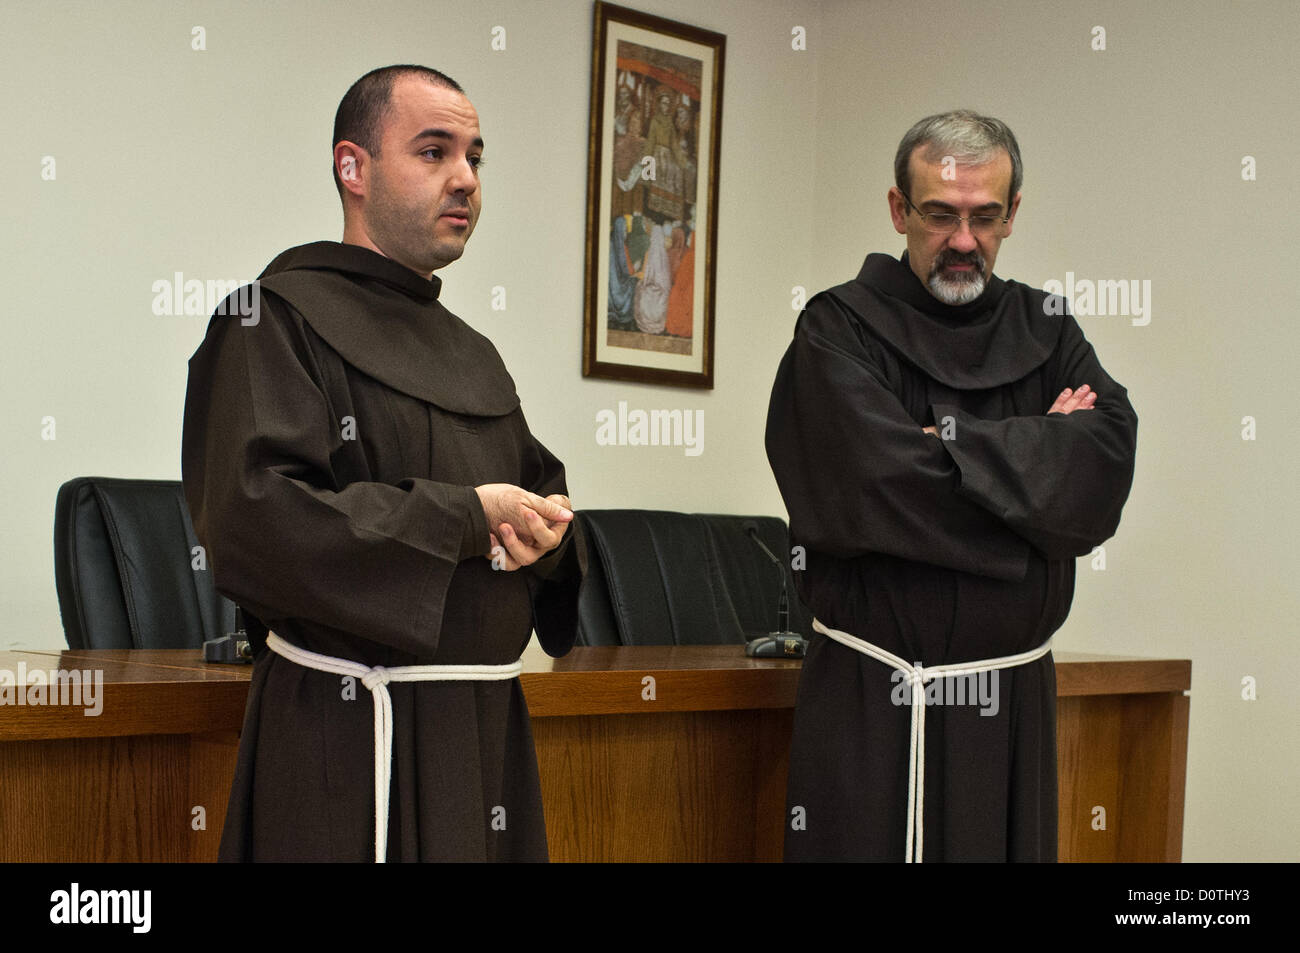 Jerusalem, Israel. 30th November 2012. The Custos of the Holy Land, Father Pierbattista Pizzaballa (R), listens as Brother Alberto (L), a university graduate and musician, explains the circumstances under which he decided to become a Franciscan monk and serve in the Holy Land. Jerusalem, Israel. 30-Nov-2012.  Of the 20,000 Franciscan monks worldwide about 300 reside in Israel as well as some 1,000 nuns. Saint Francis Francesco of Assisi first arrived in the Holy Land in 1219 and they have been custodians of the holy sites ever since. Stock Photo